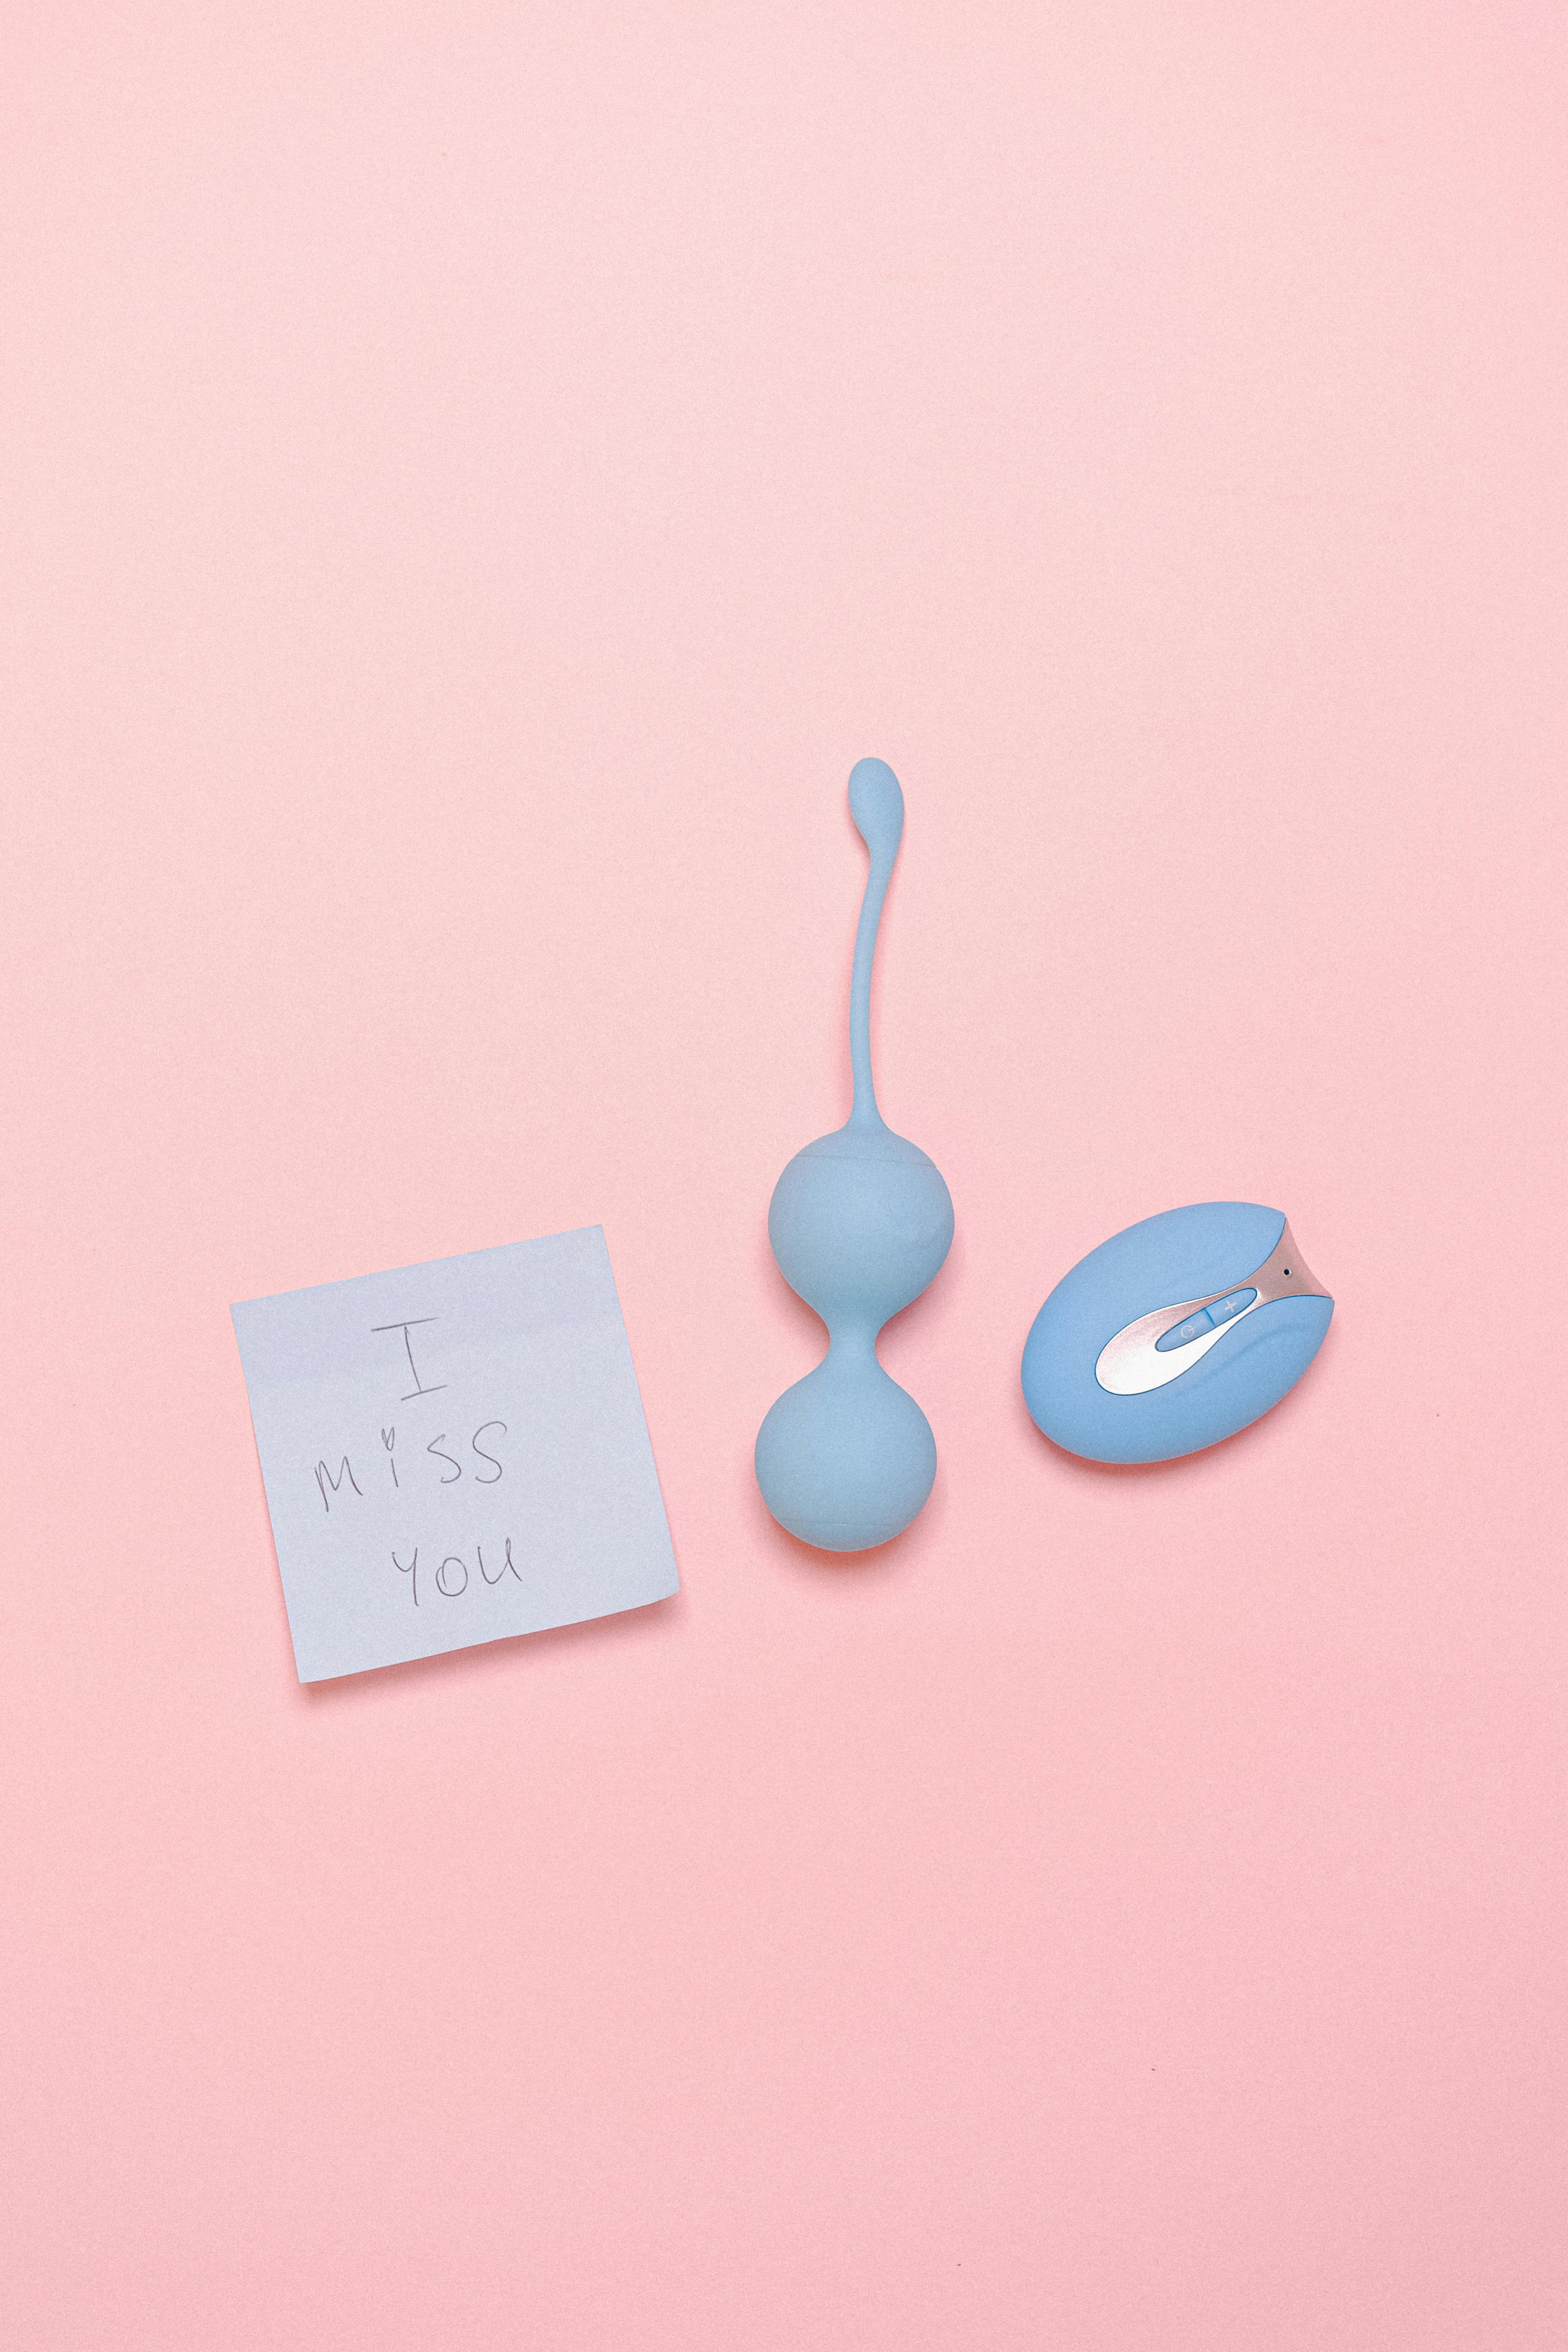 sticky note and sex toy